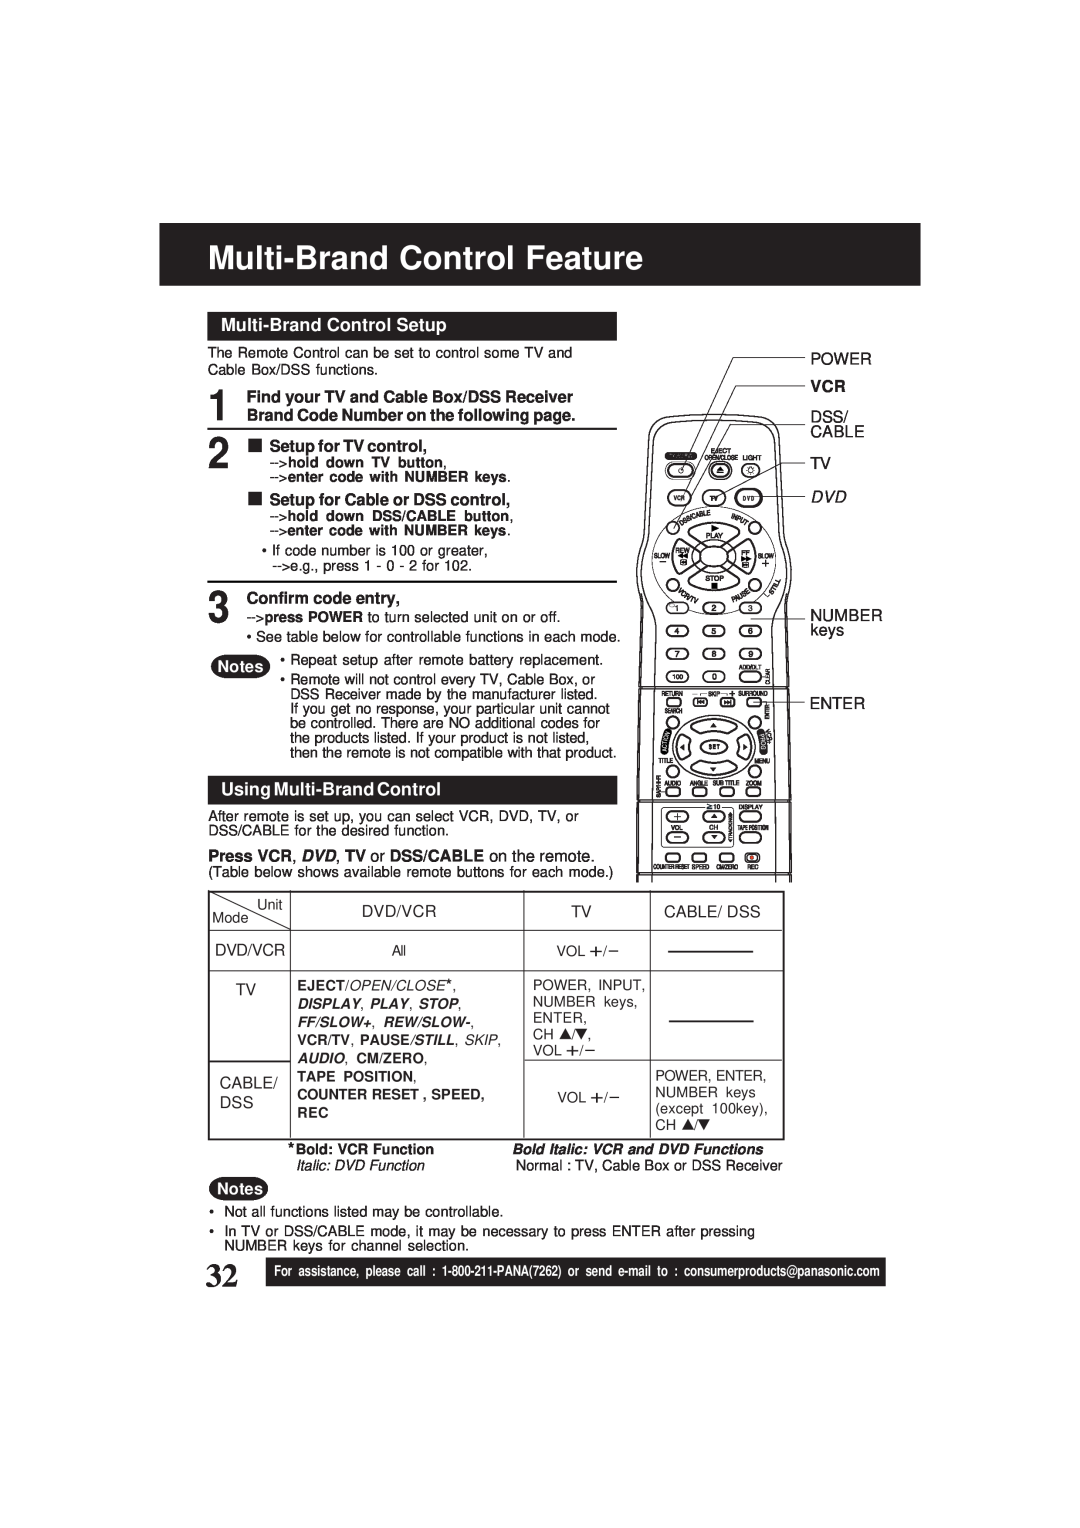 Panasonic PV-D4761 Multi-Brand Control Feature, Multi-Brand Control Setup, Using Multi-Brand Control, Setup for TV control 